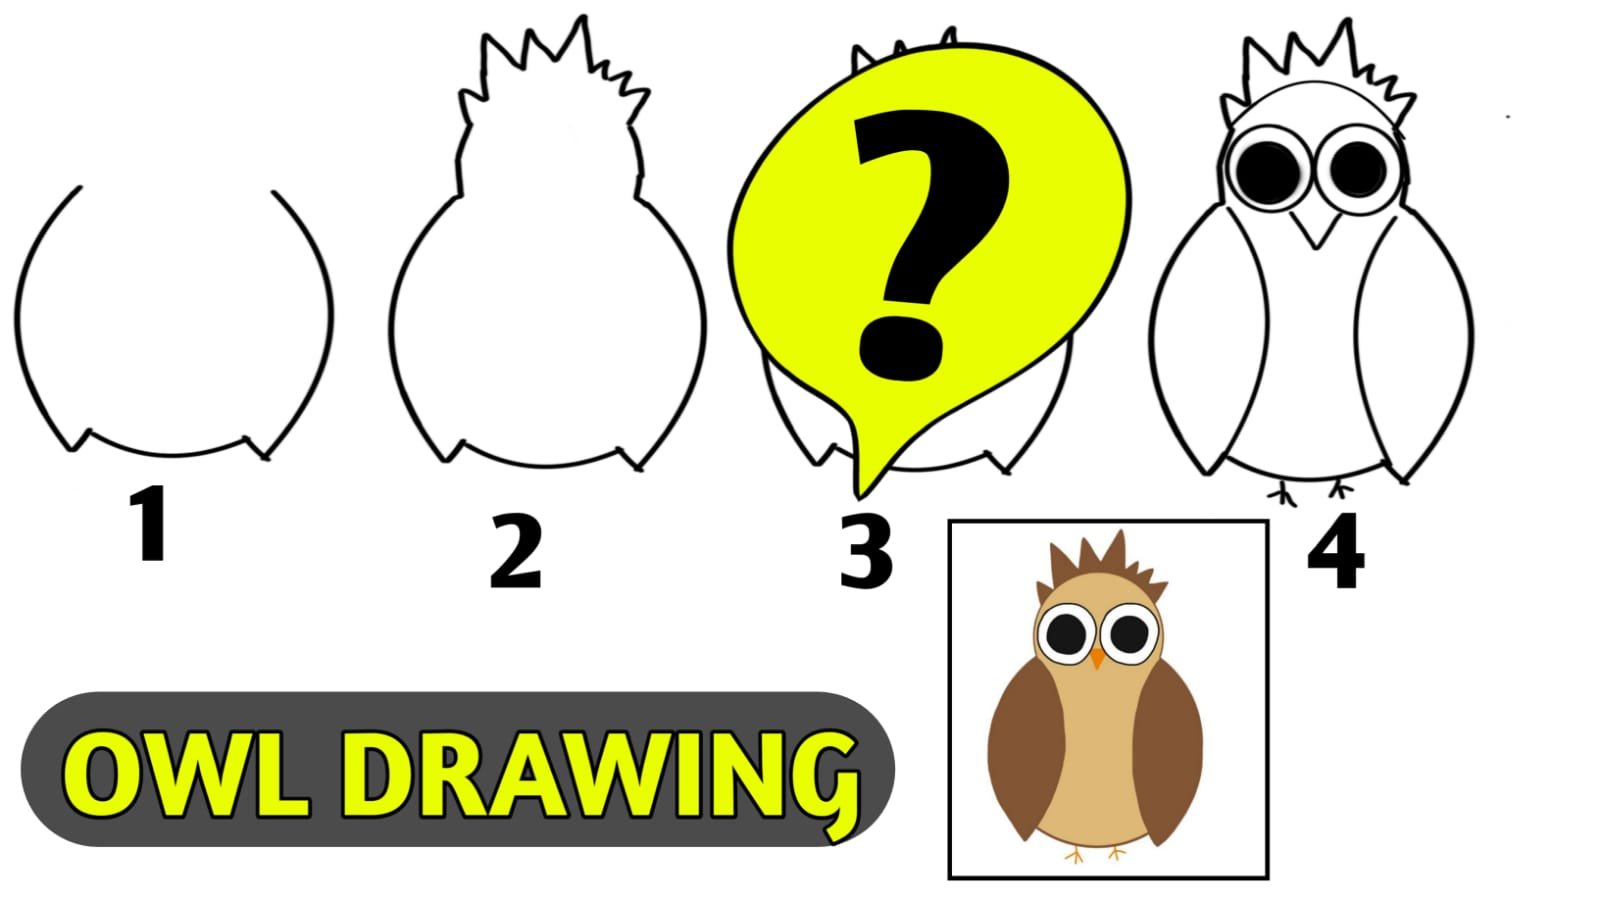 How to Draw an Owl - Easy Drawing Tutorial For Kids